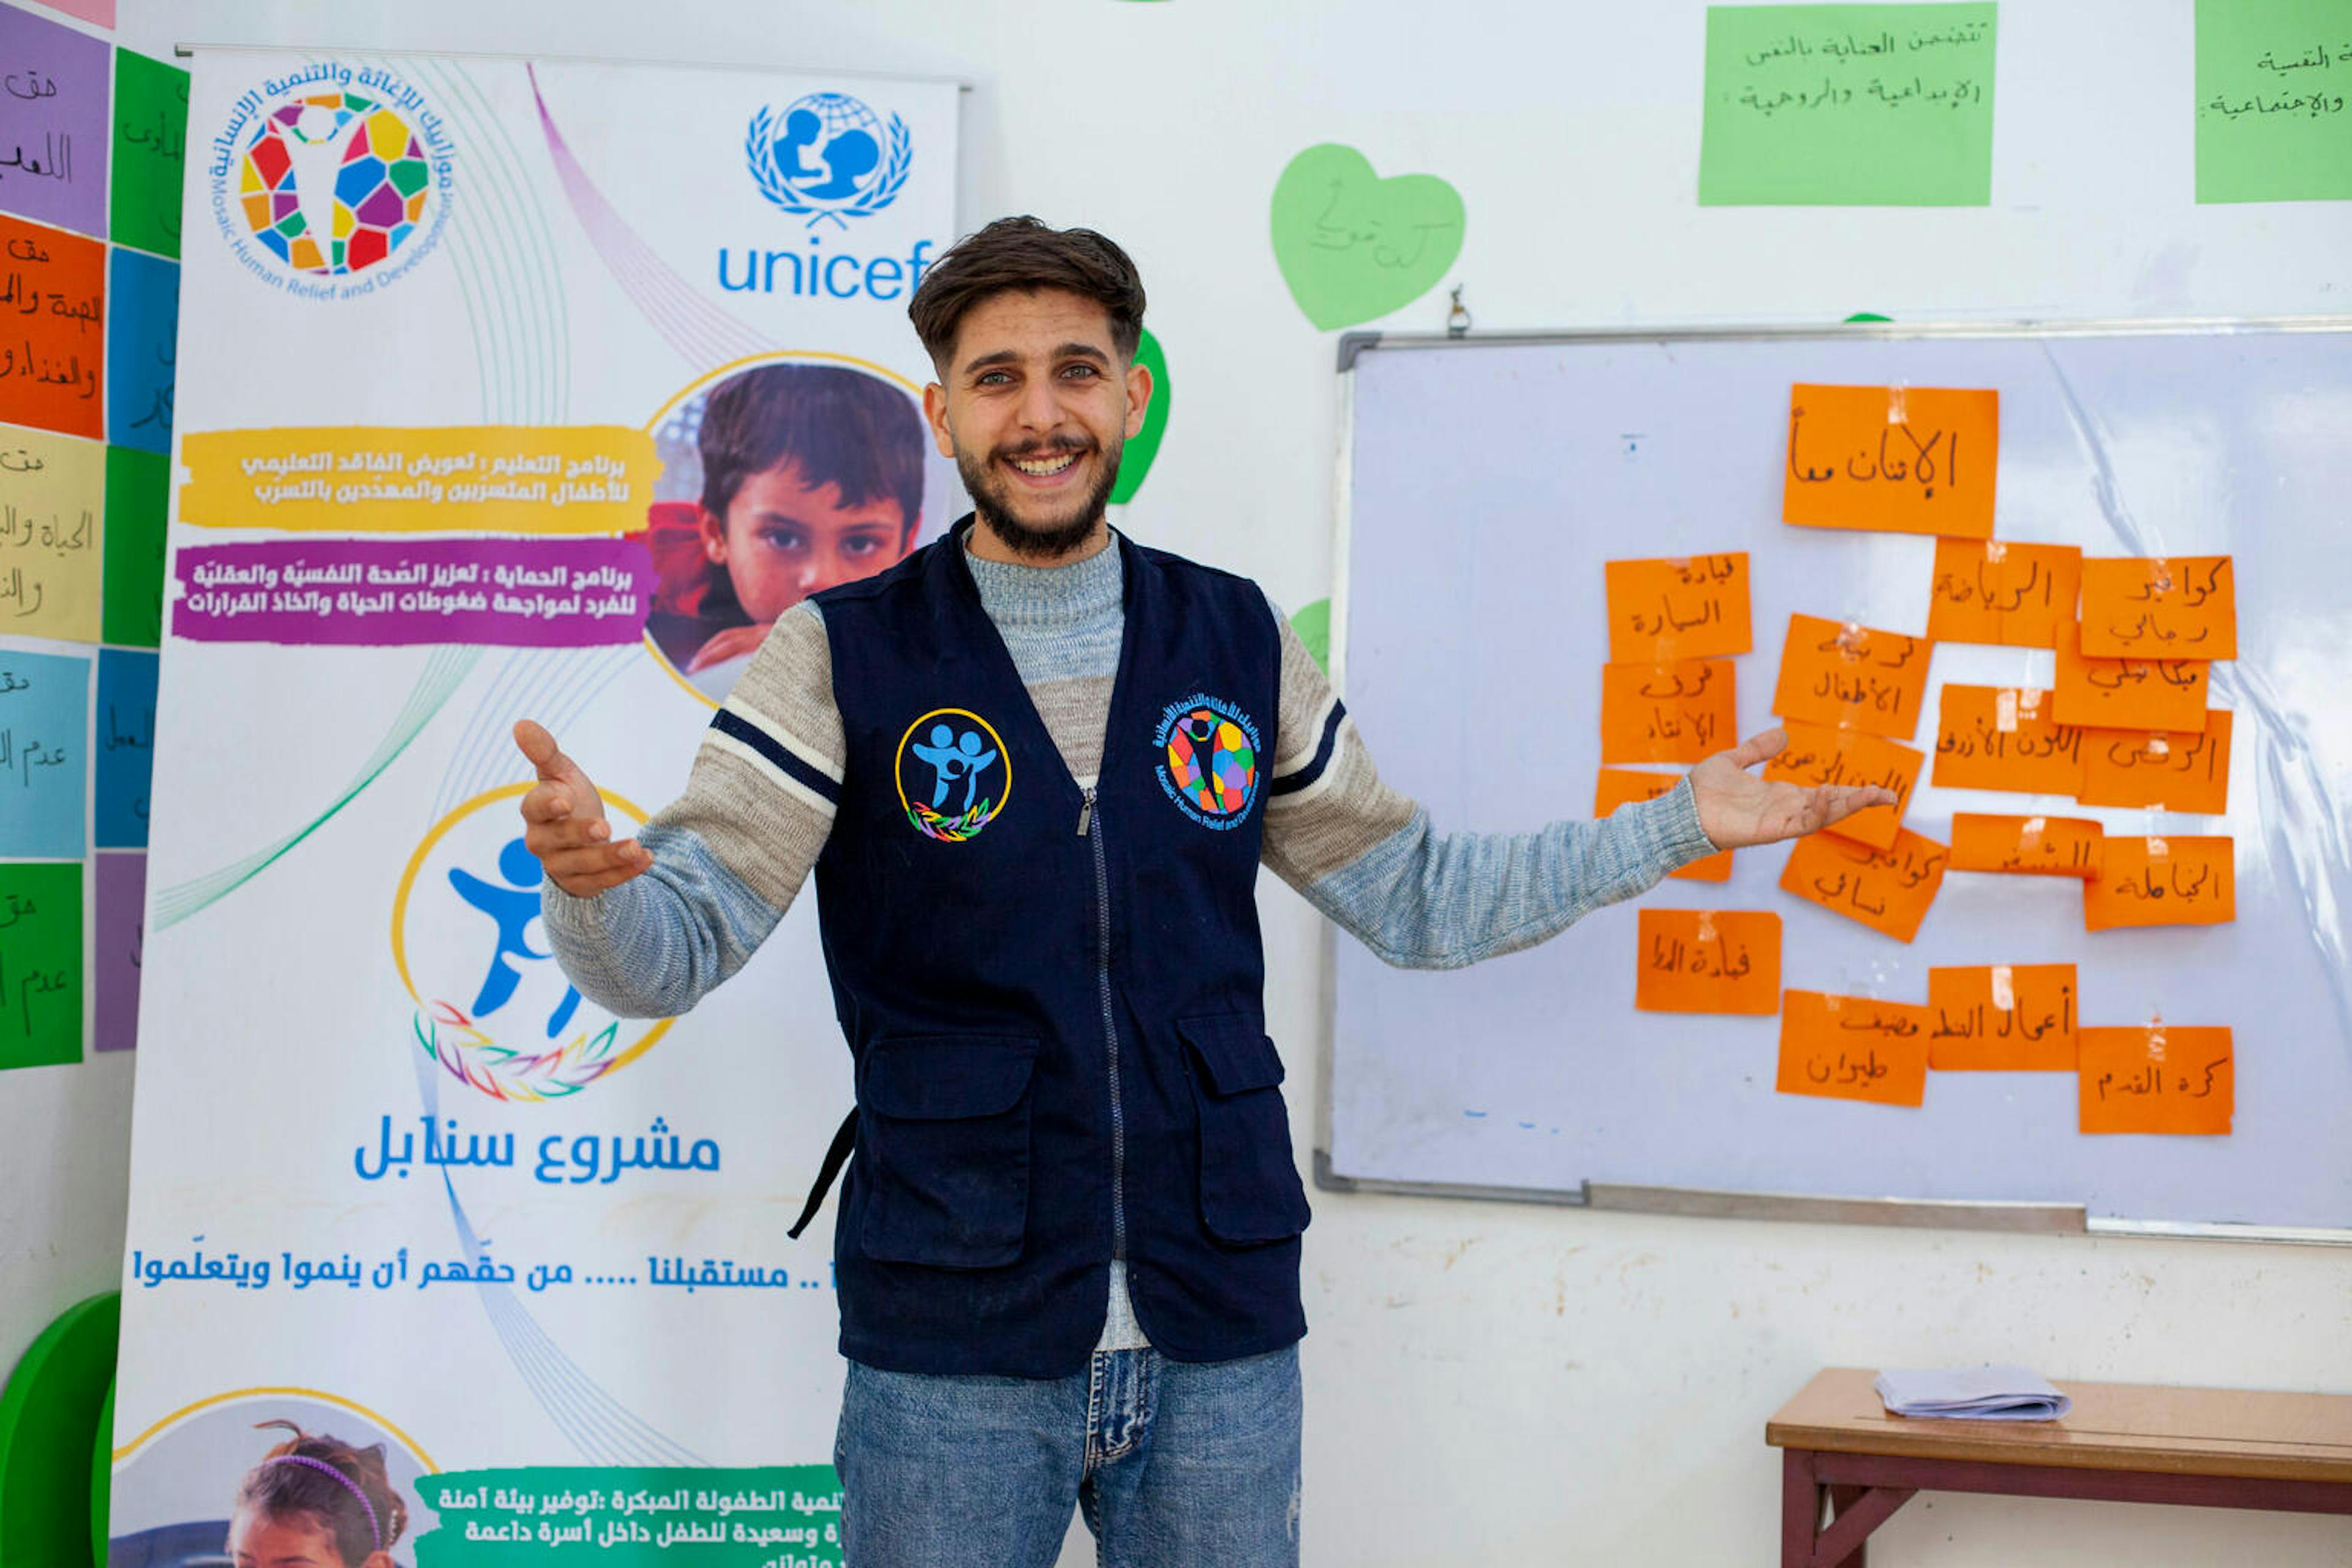 Hope and Resilience in Türkiye and Syria - Inspired by UNICEF workers, a young man joins the team.